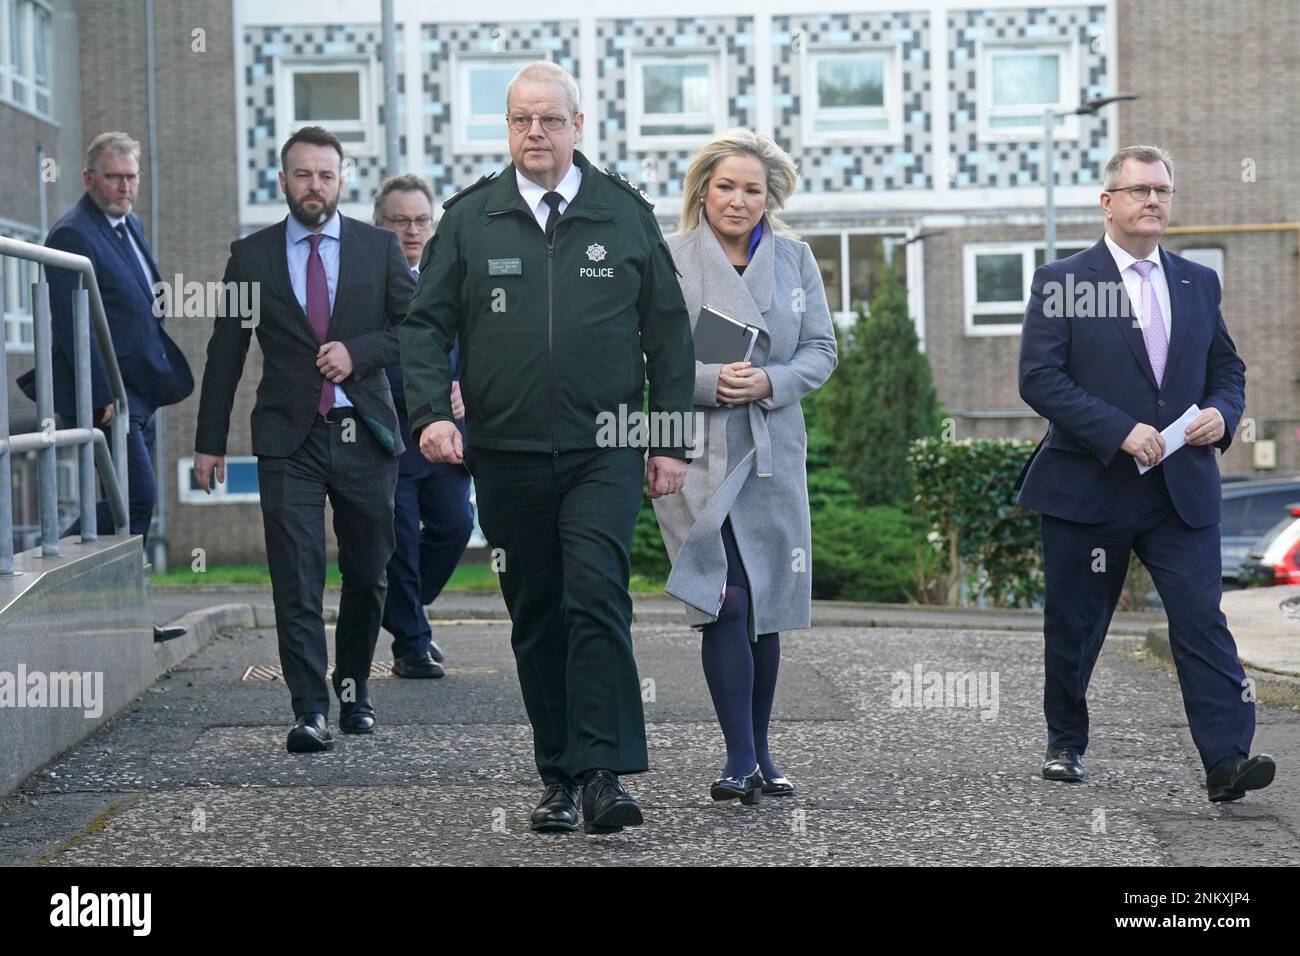 (left to right) Ulster Unionist Party (UUP) leader Doug Beattie, SDLP leader Colum Eastwood, Stephen Farry from the Alliance party, Police Service of Northern Ireland (PSNI) Chief Constable Simon Byrne, Sinn Fein deputy leader Michelle O'Neill, and DUP leader Jeffrey Donaldson, arriving for a press conference outside the PSNI HQ in Belfast, where they are meeting following the shooting of PSNI Detective Chief Inspector John Caldwell on Wednesday. Picture date: Friday February 24, 2023. Stock Photo